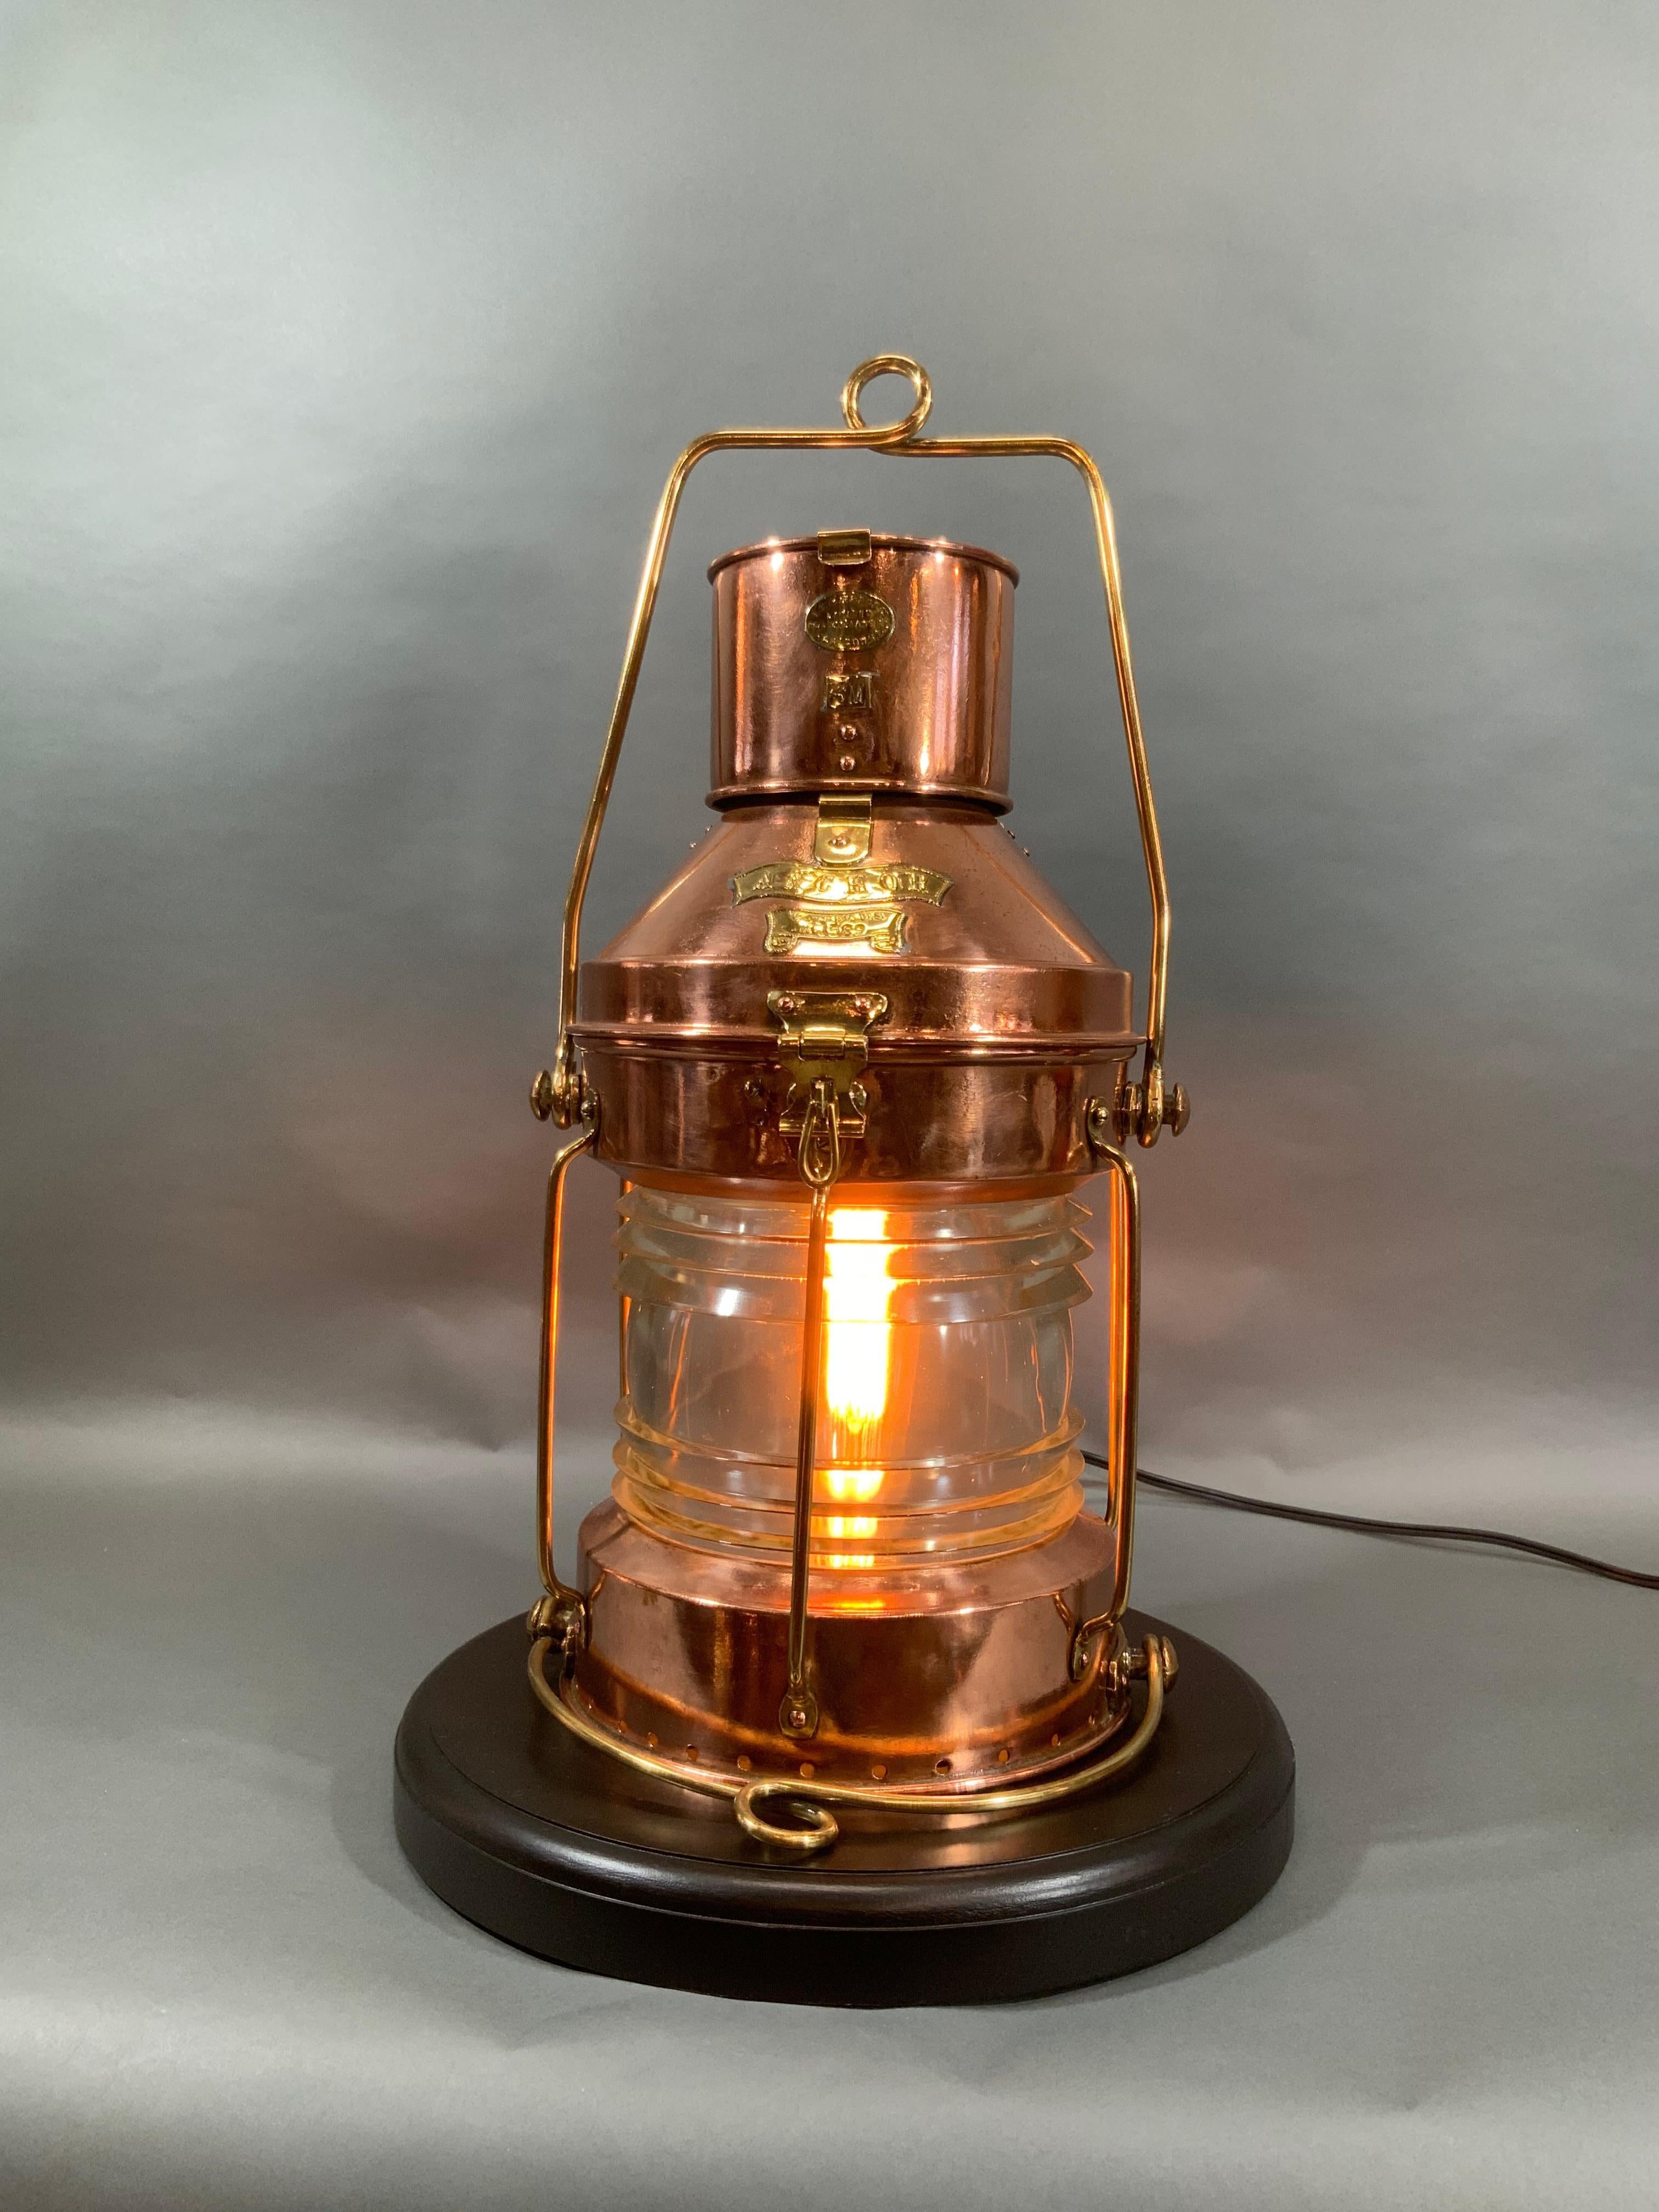 Ship's lantern of copper and brass. Meticulously polished and lacquered. Fitted with a glass Fresnel lens with protective brass bars. Vented top. Hoisting and bale handles. Wired with socket and cord for home use. Makers badge from RC Murray.